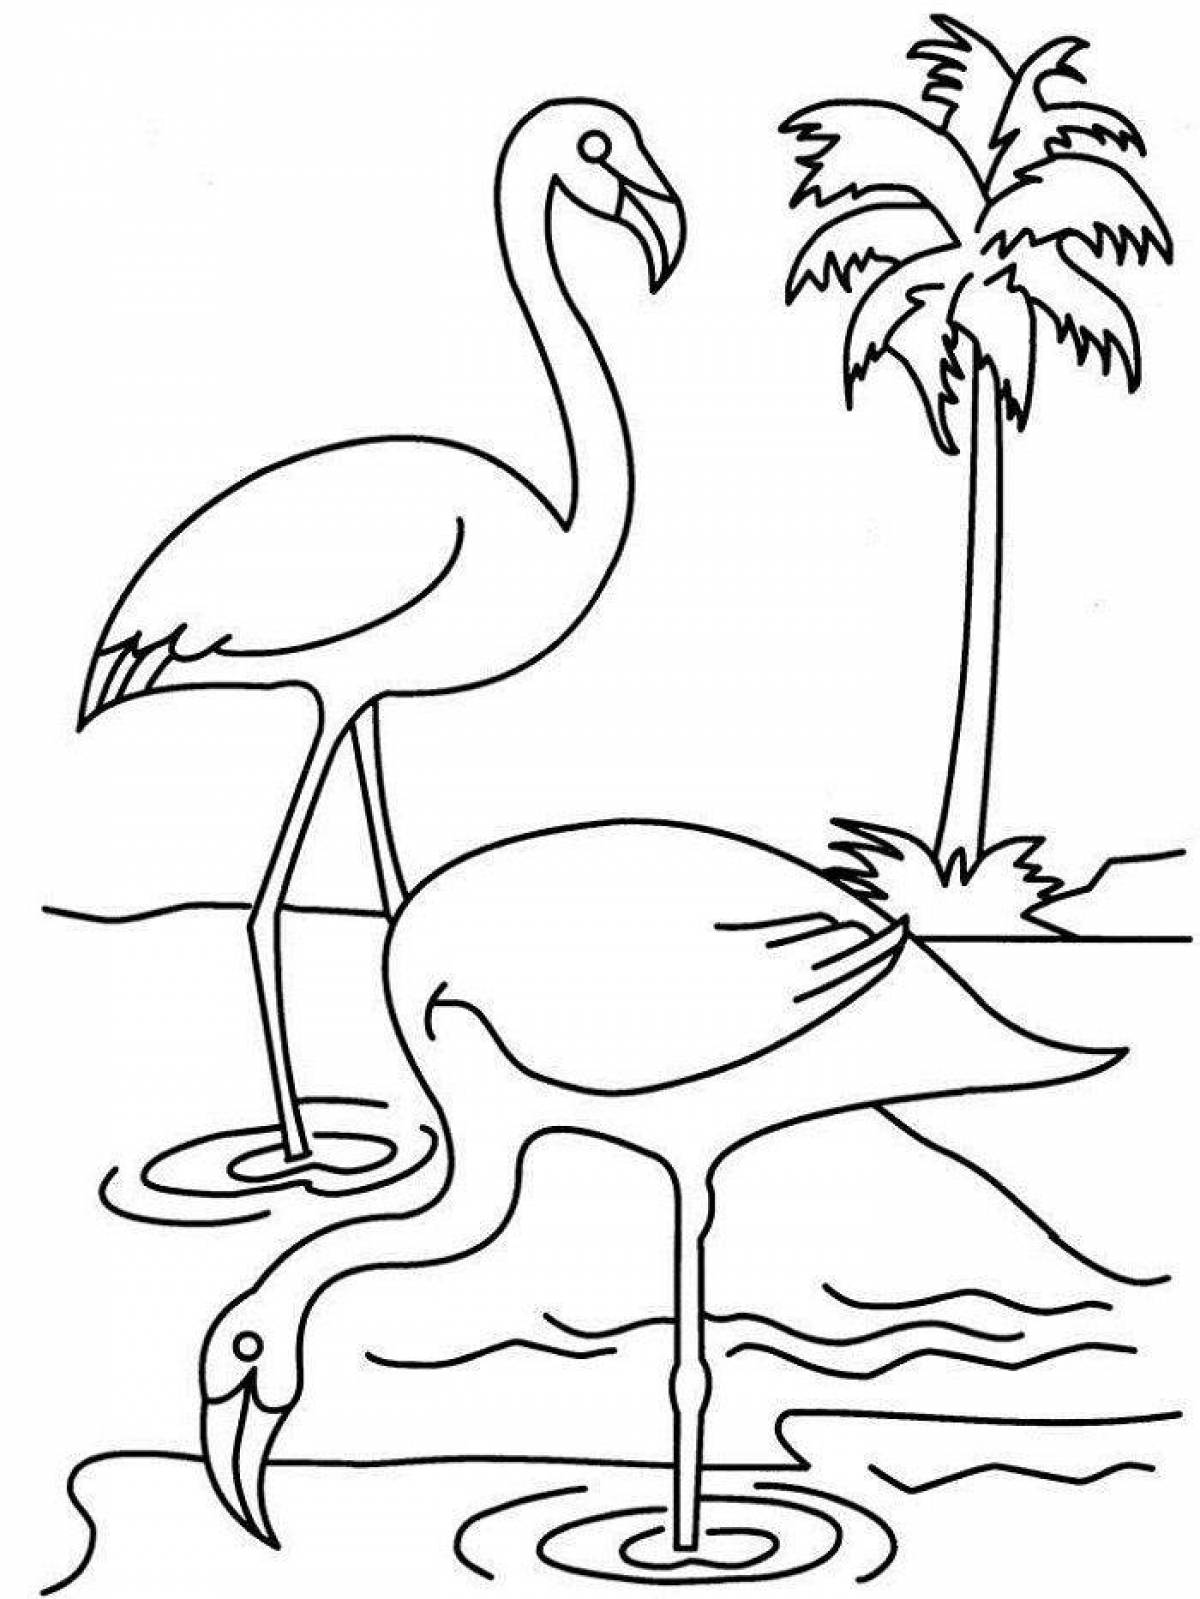 Adorable flamingo coloring pages for kids